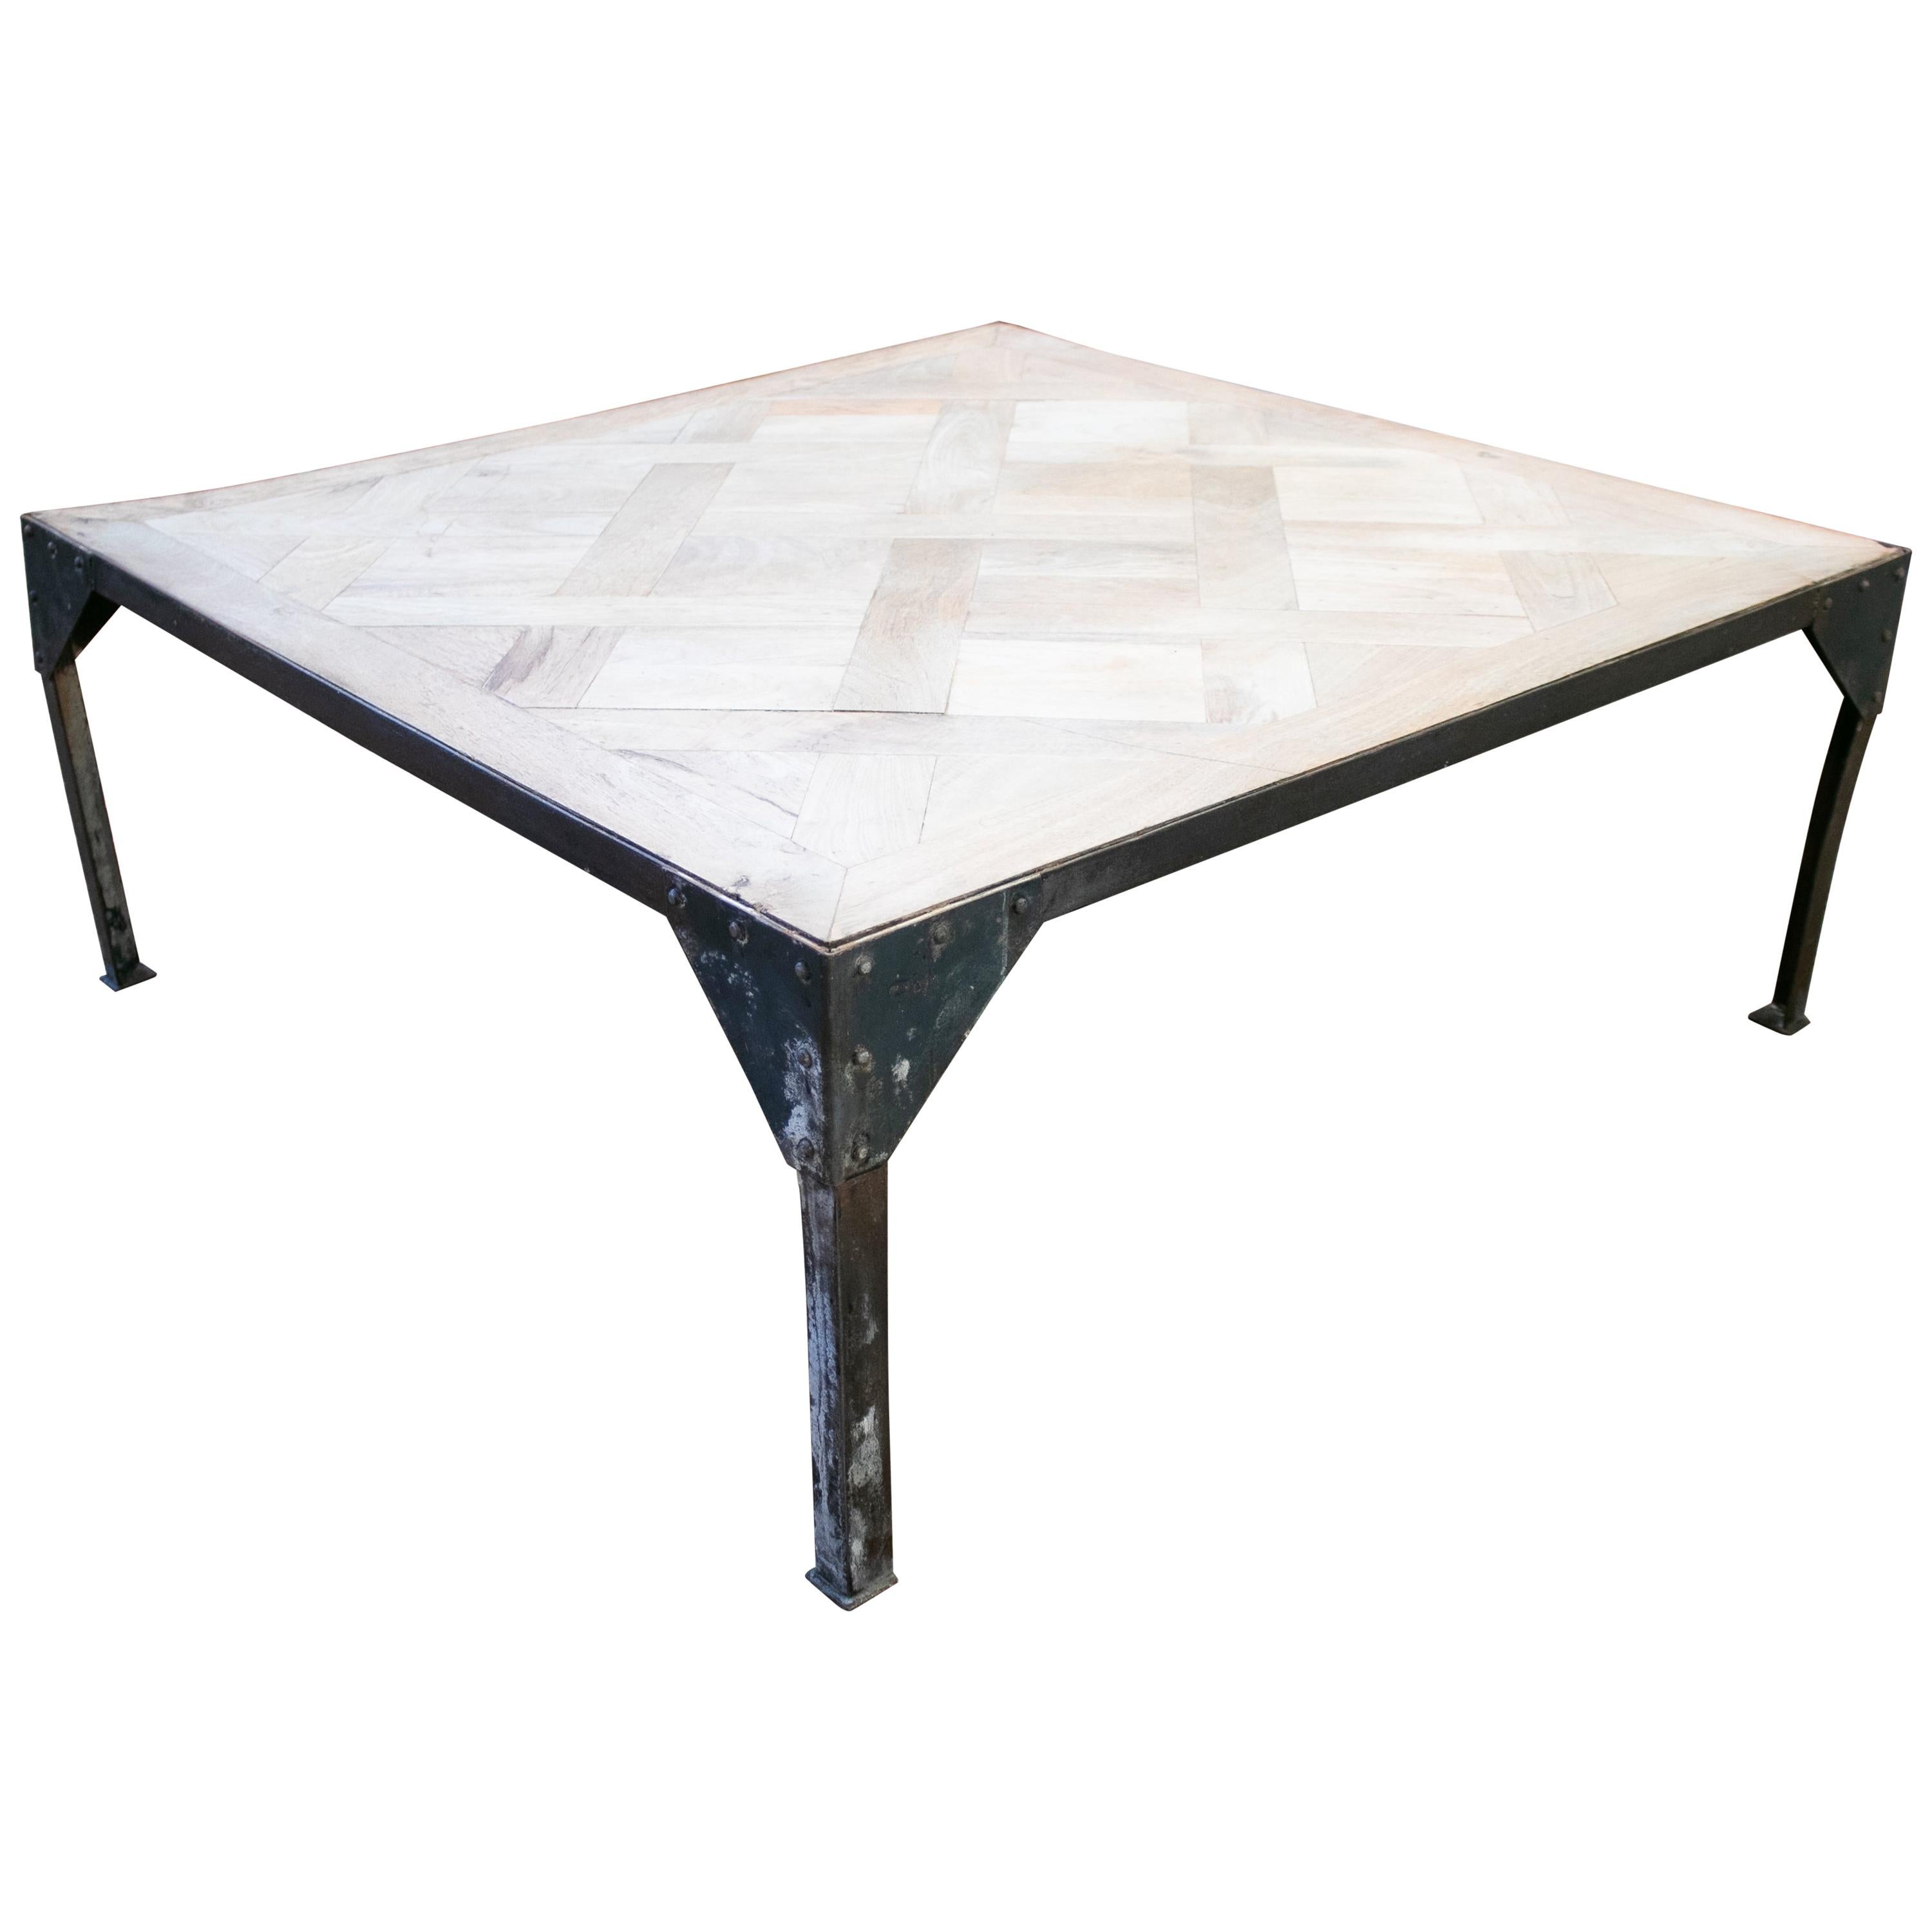 1980s French Wood Top on Rectangular Iron Base Industrial Styled Coffee Table For Sale